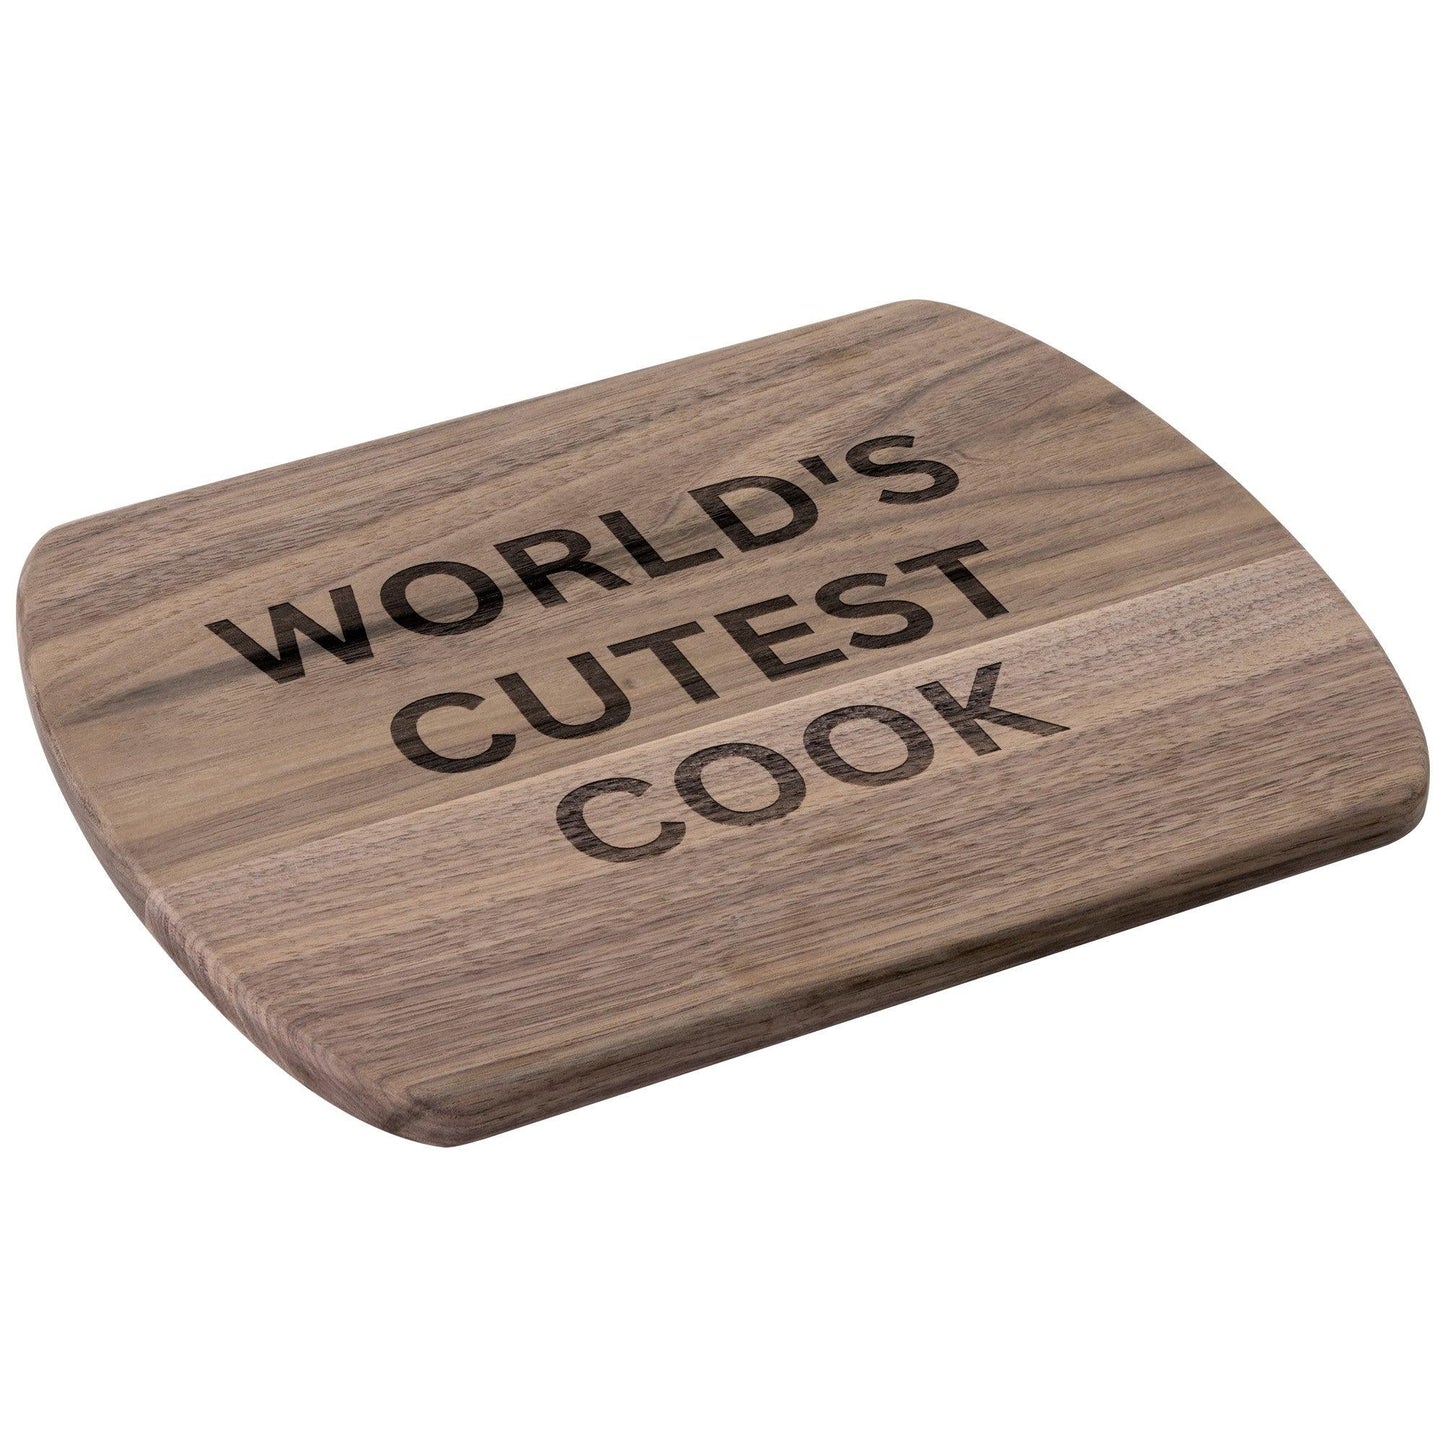 World's Cutest Cook - Charming Family Gift